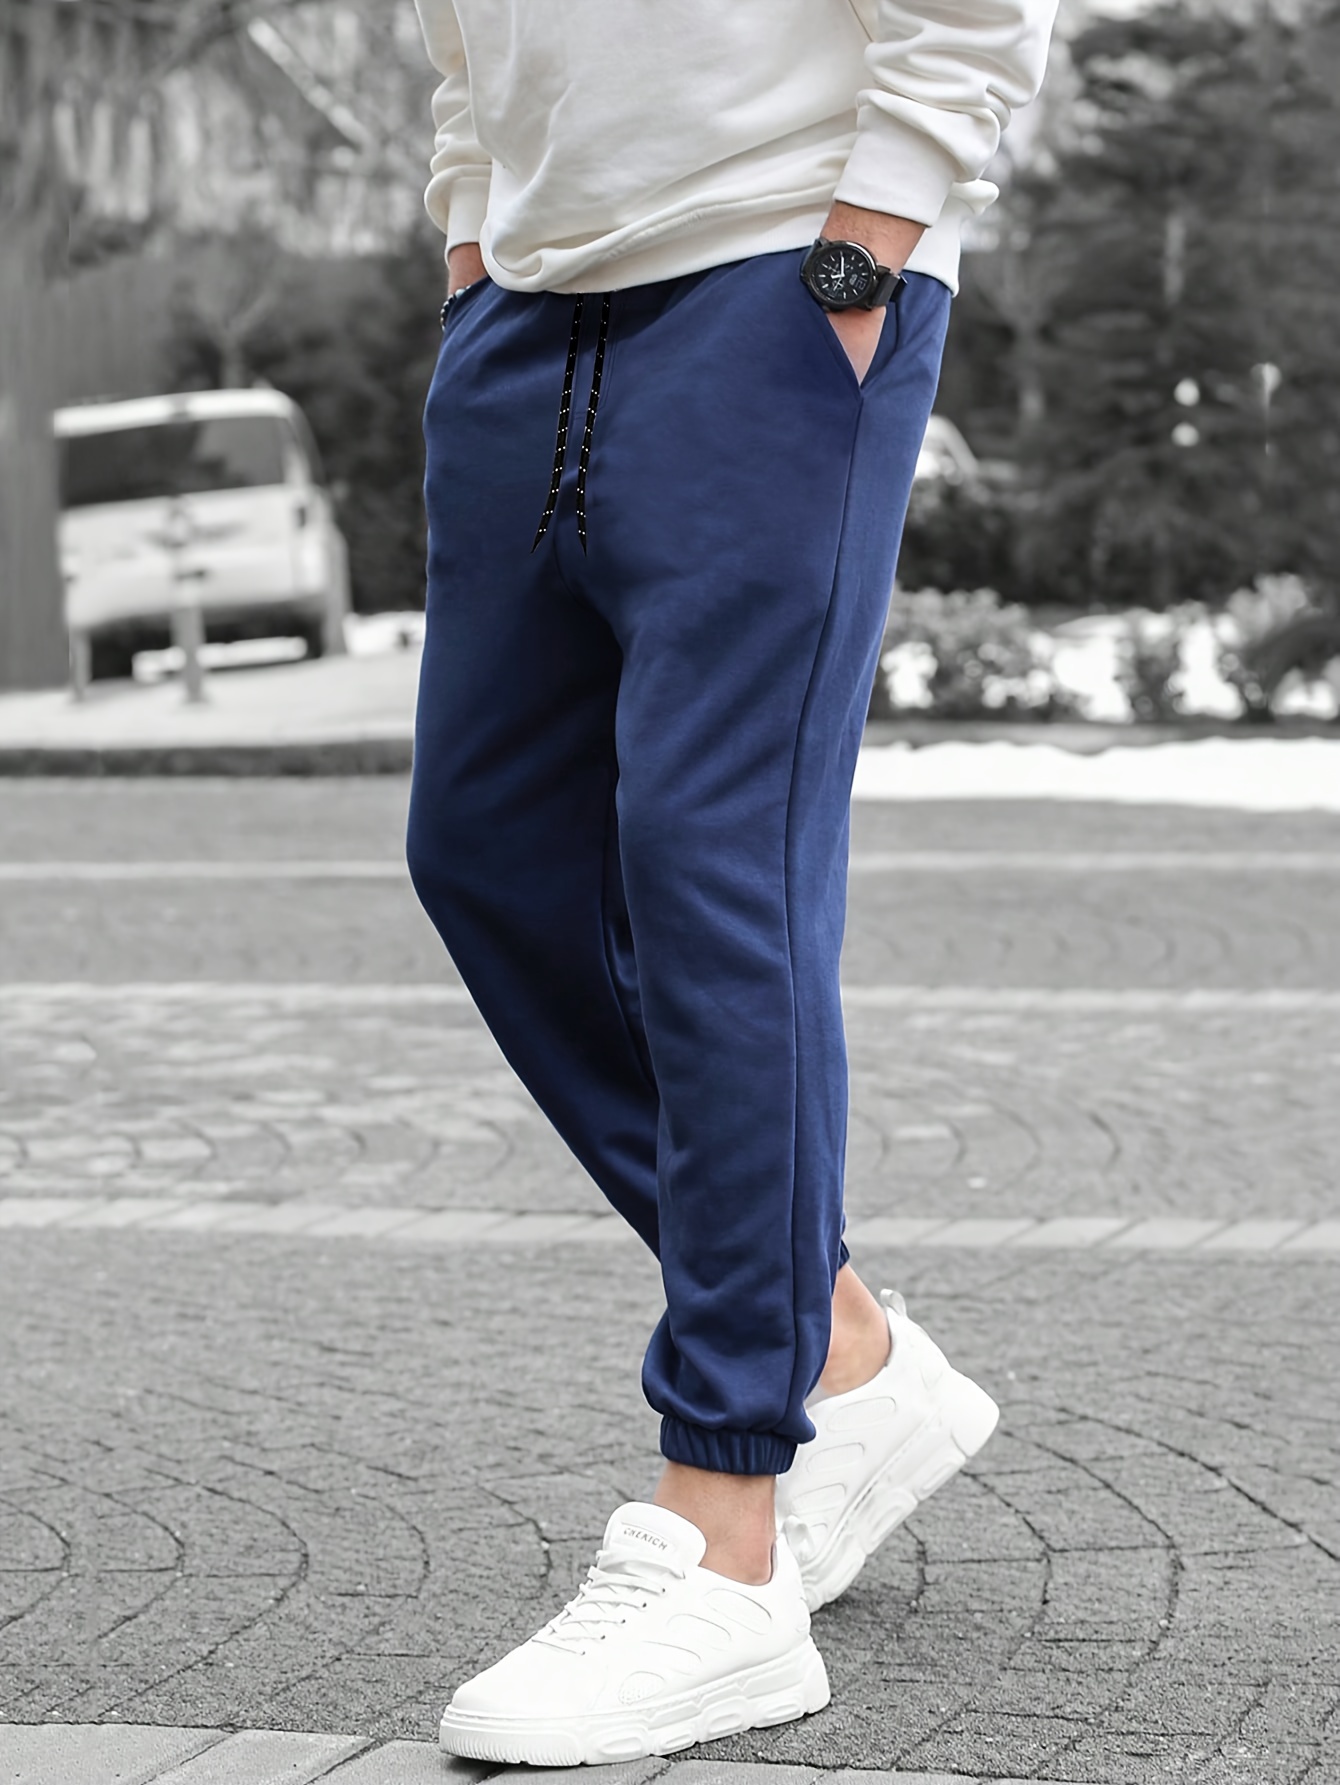 Classic Design Joggers, Men's Casual Waist Drawstring Sports Cropped Pants  For Spring Summer Outdoor